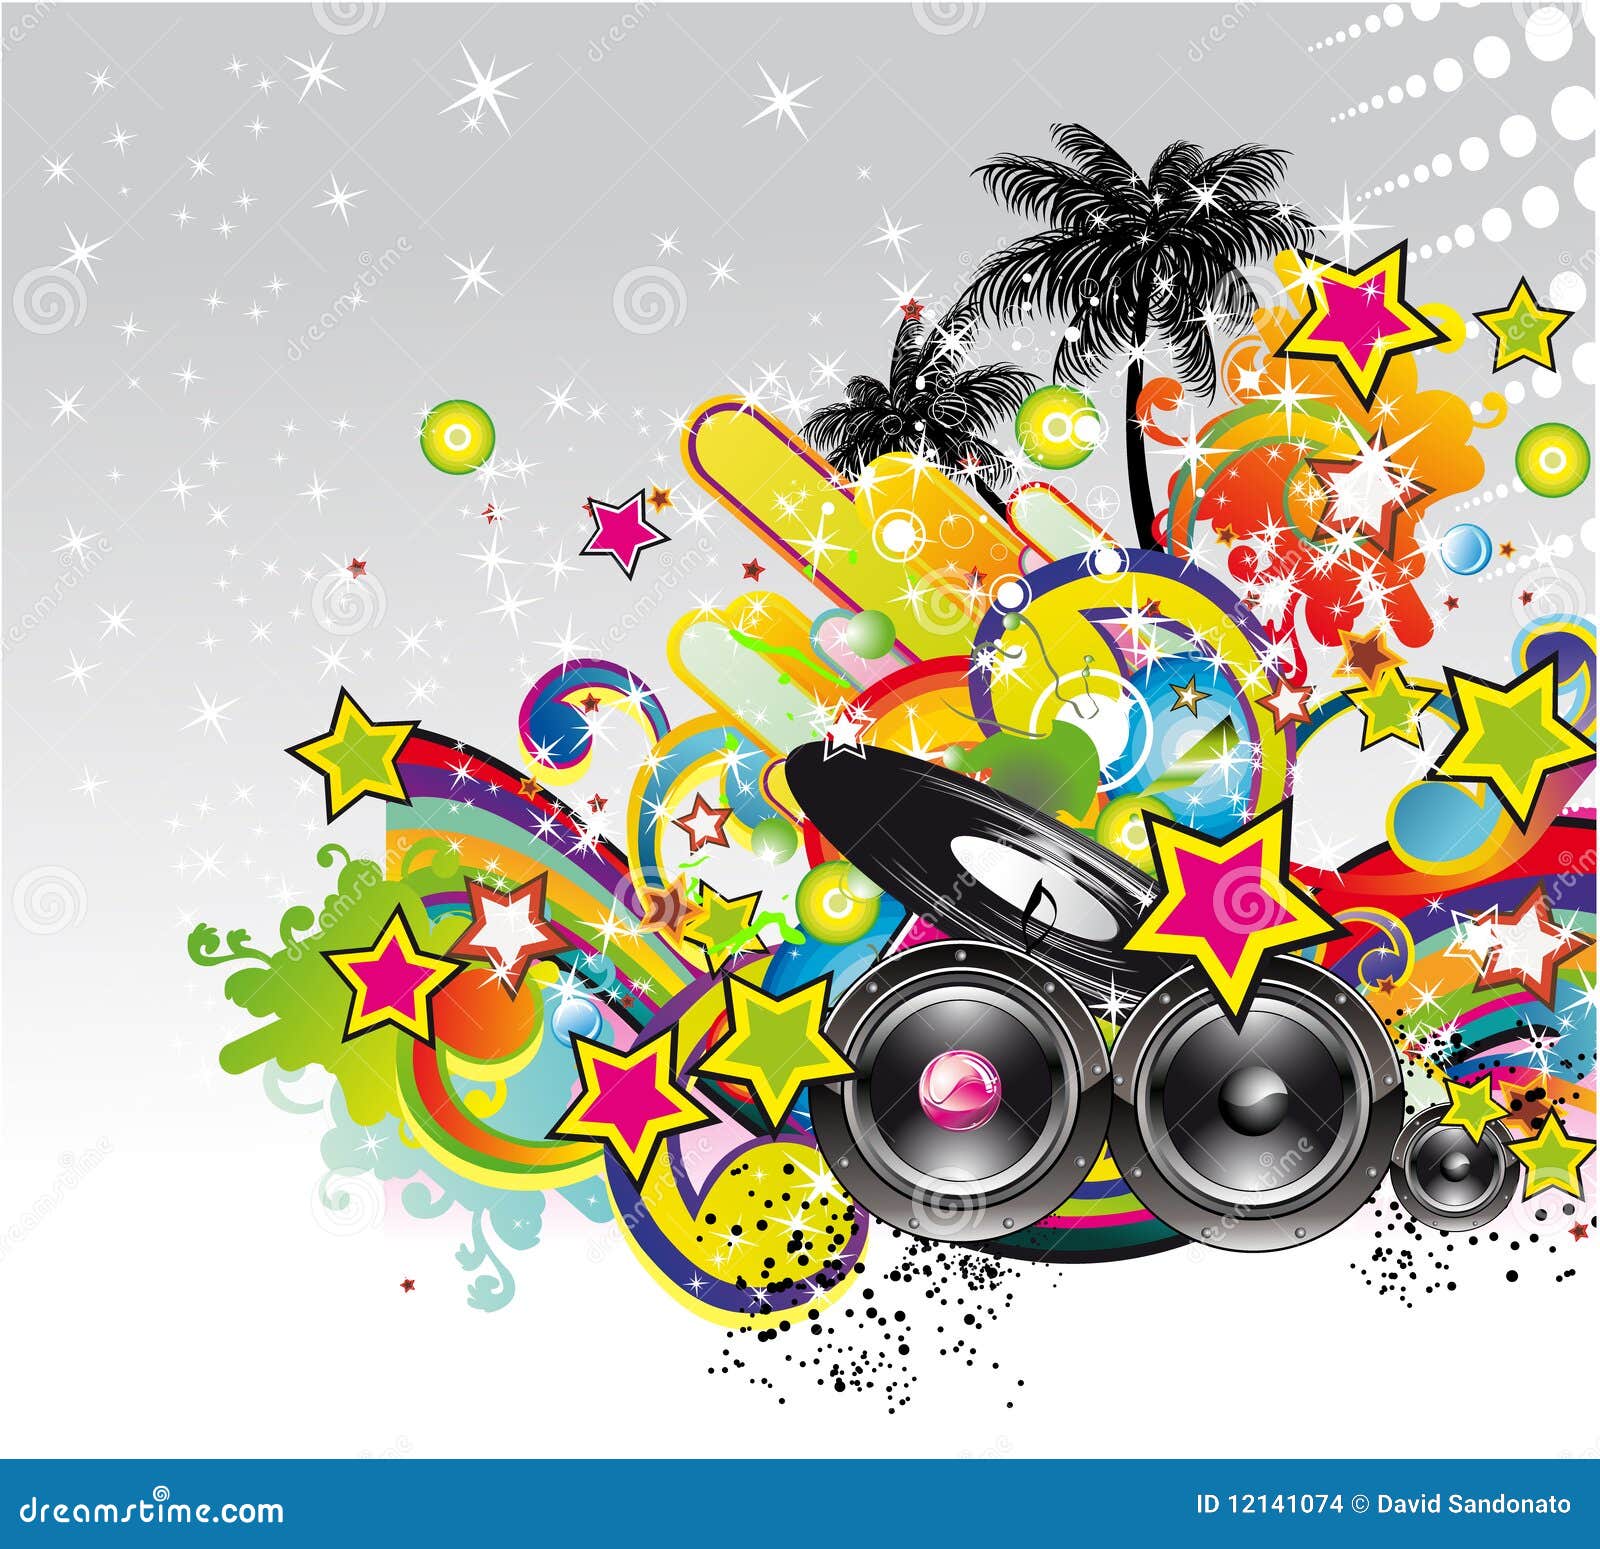 music event clipart - photo #24